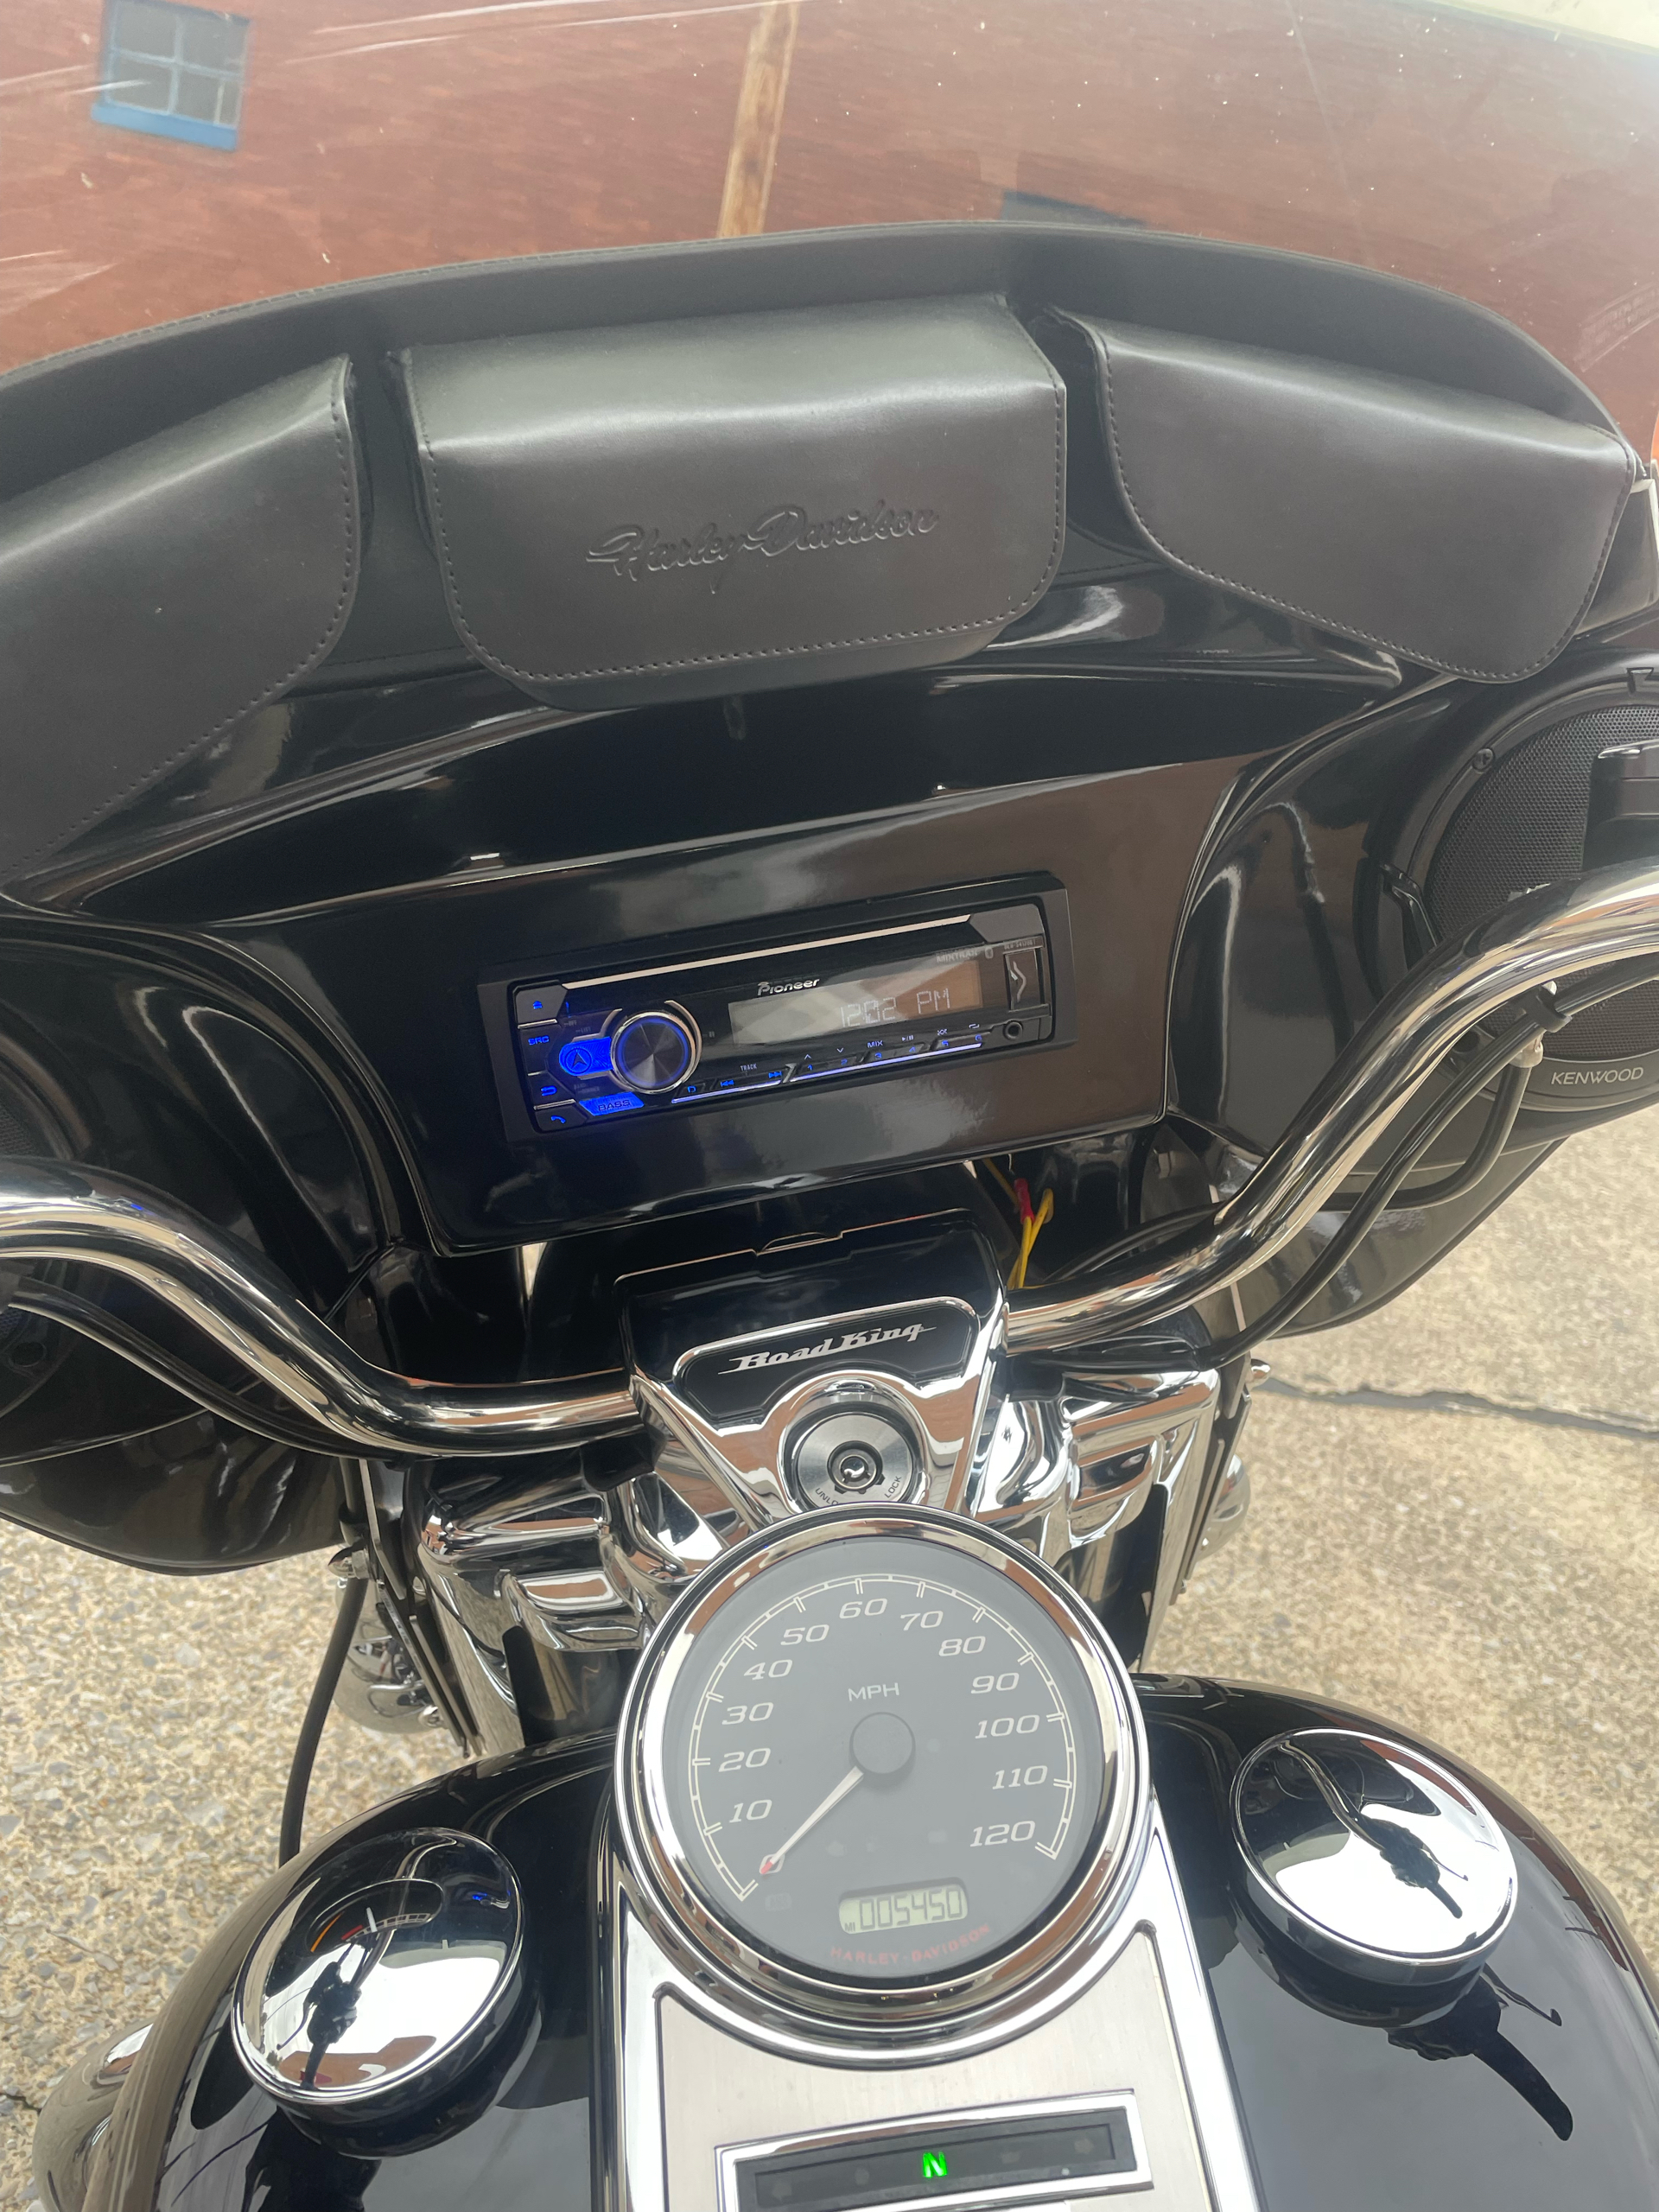 2015 Harley-Davidson Road King® in Kingsport, Tennessee - Photo 10